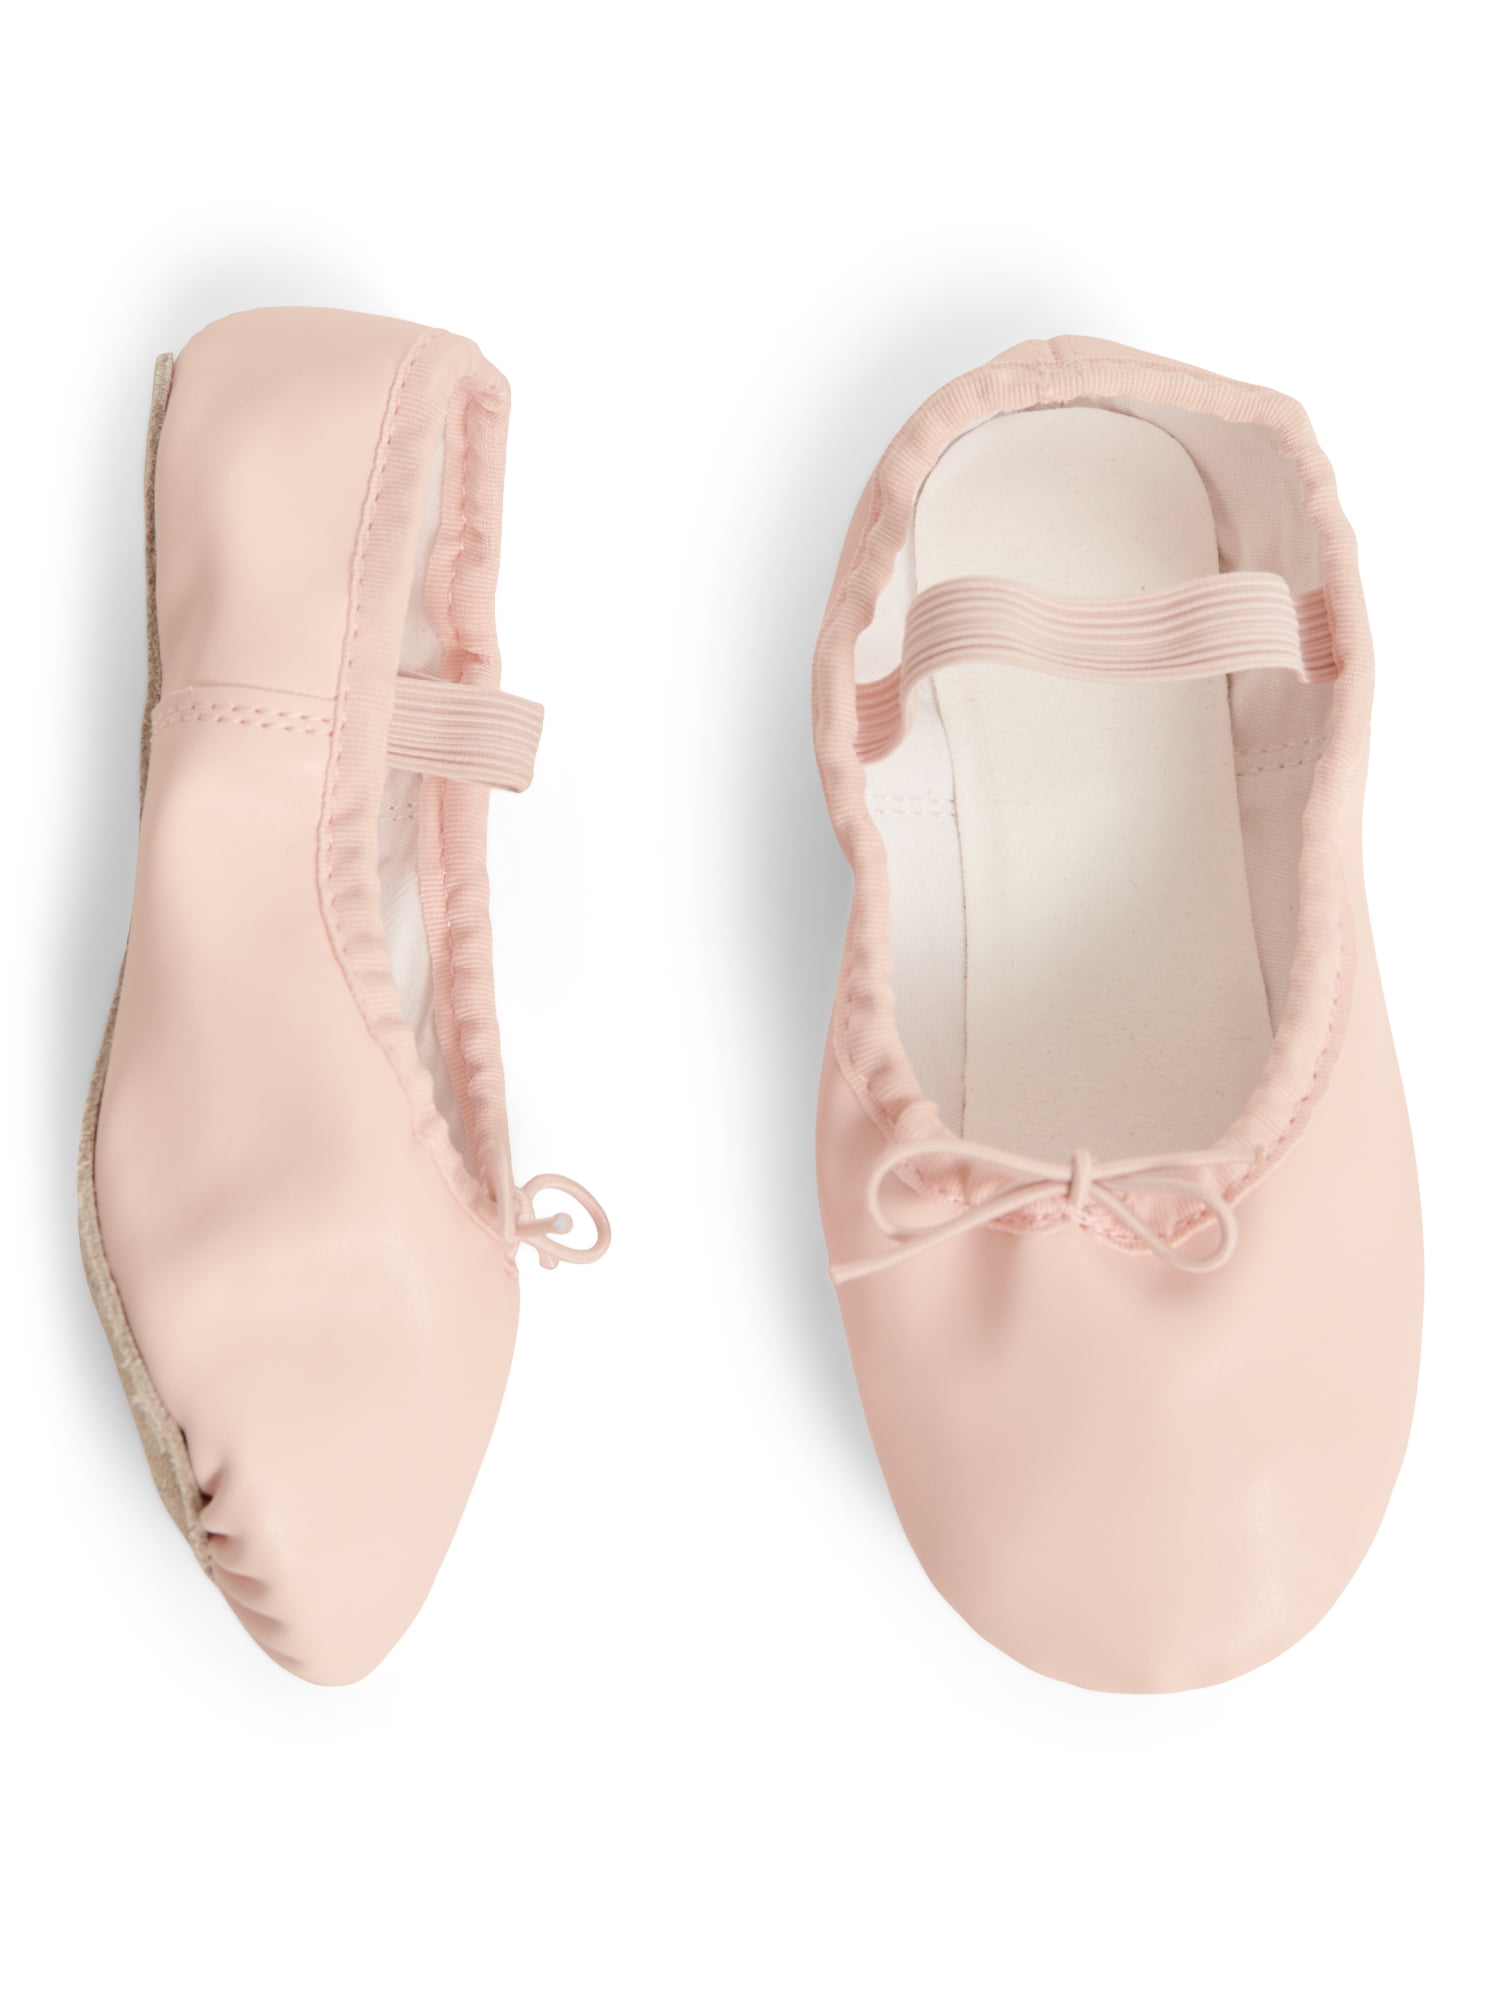 Justice Girls Ballet Dance Shoes, Sizes 1-13